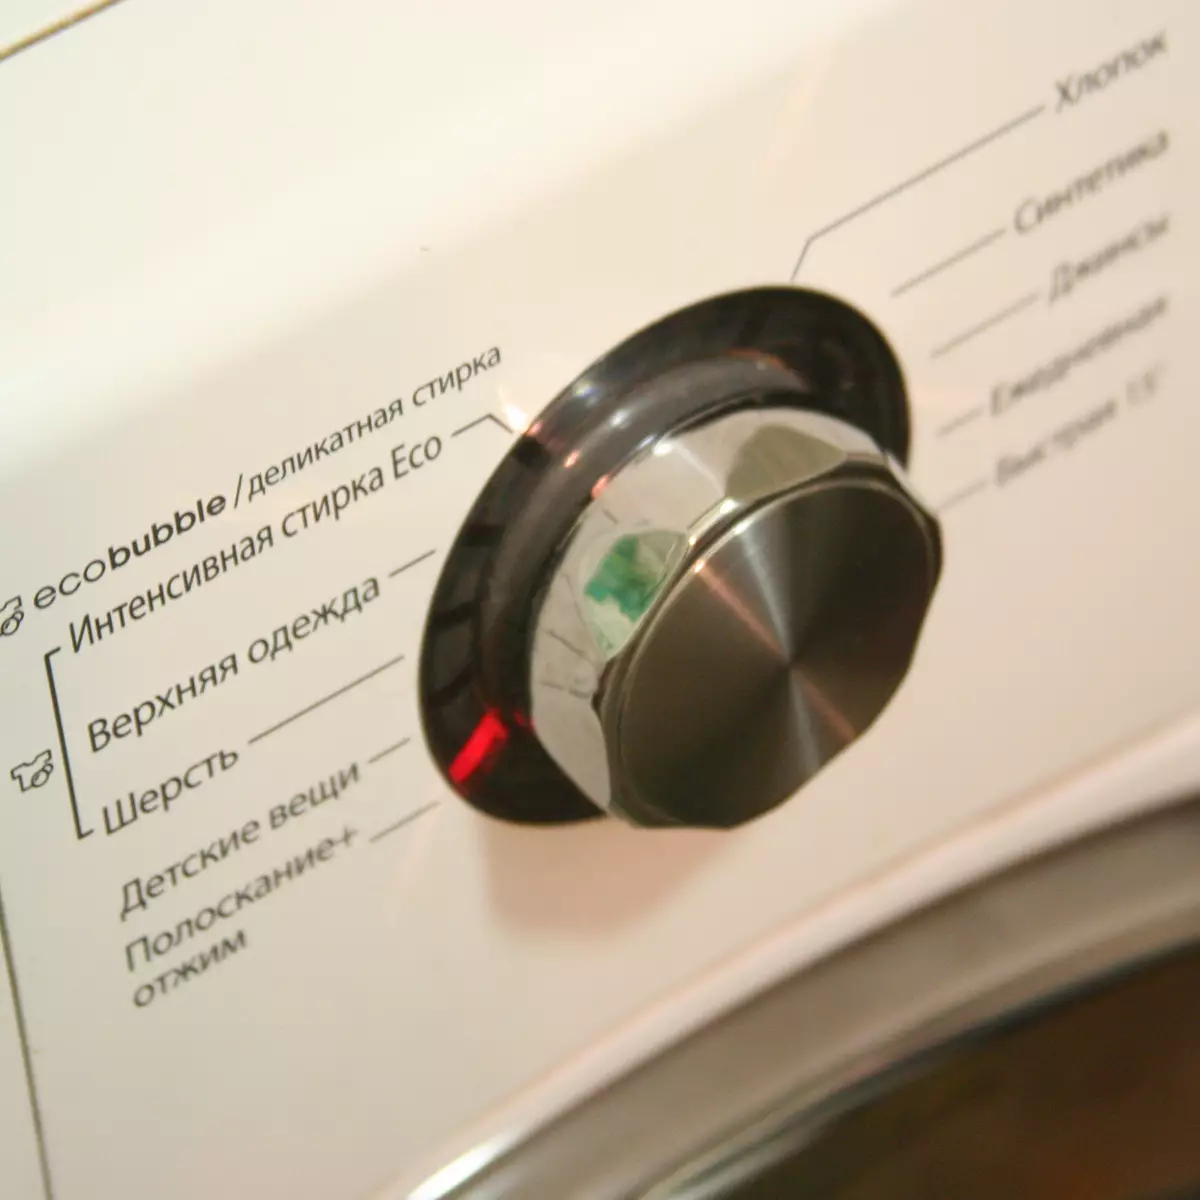 Washing machine does not want to merge water?